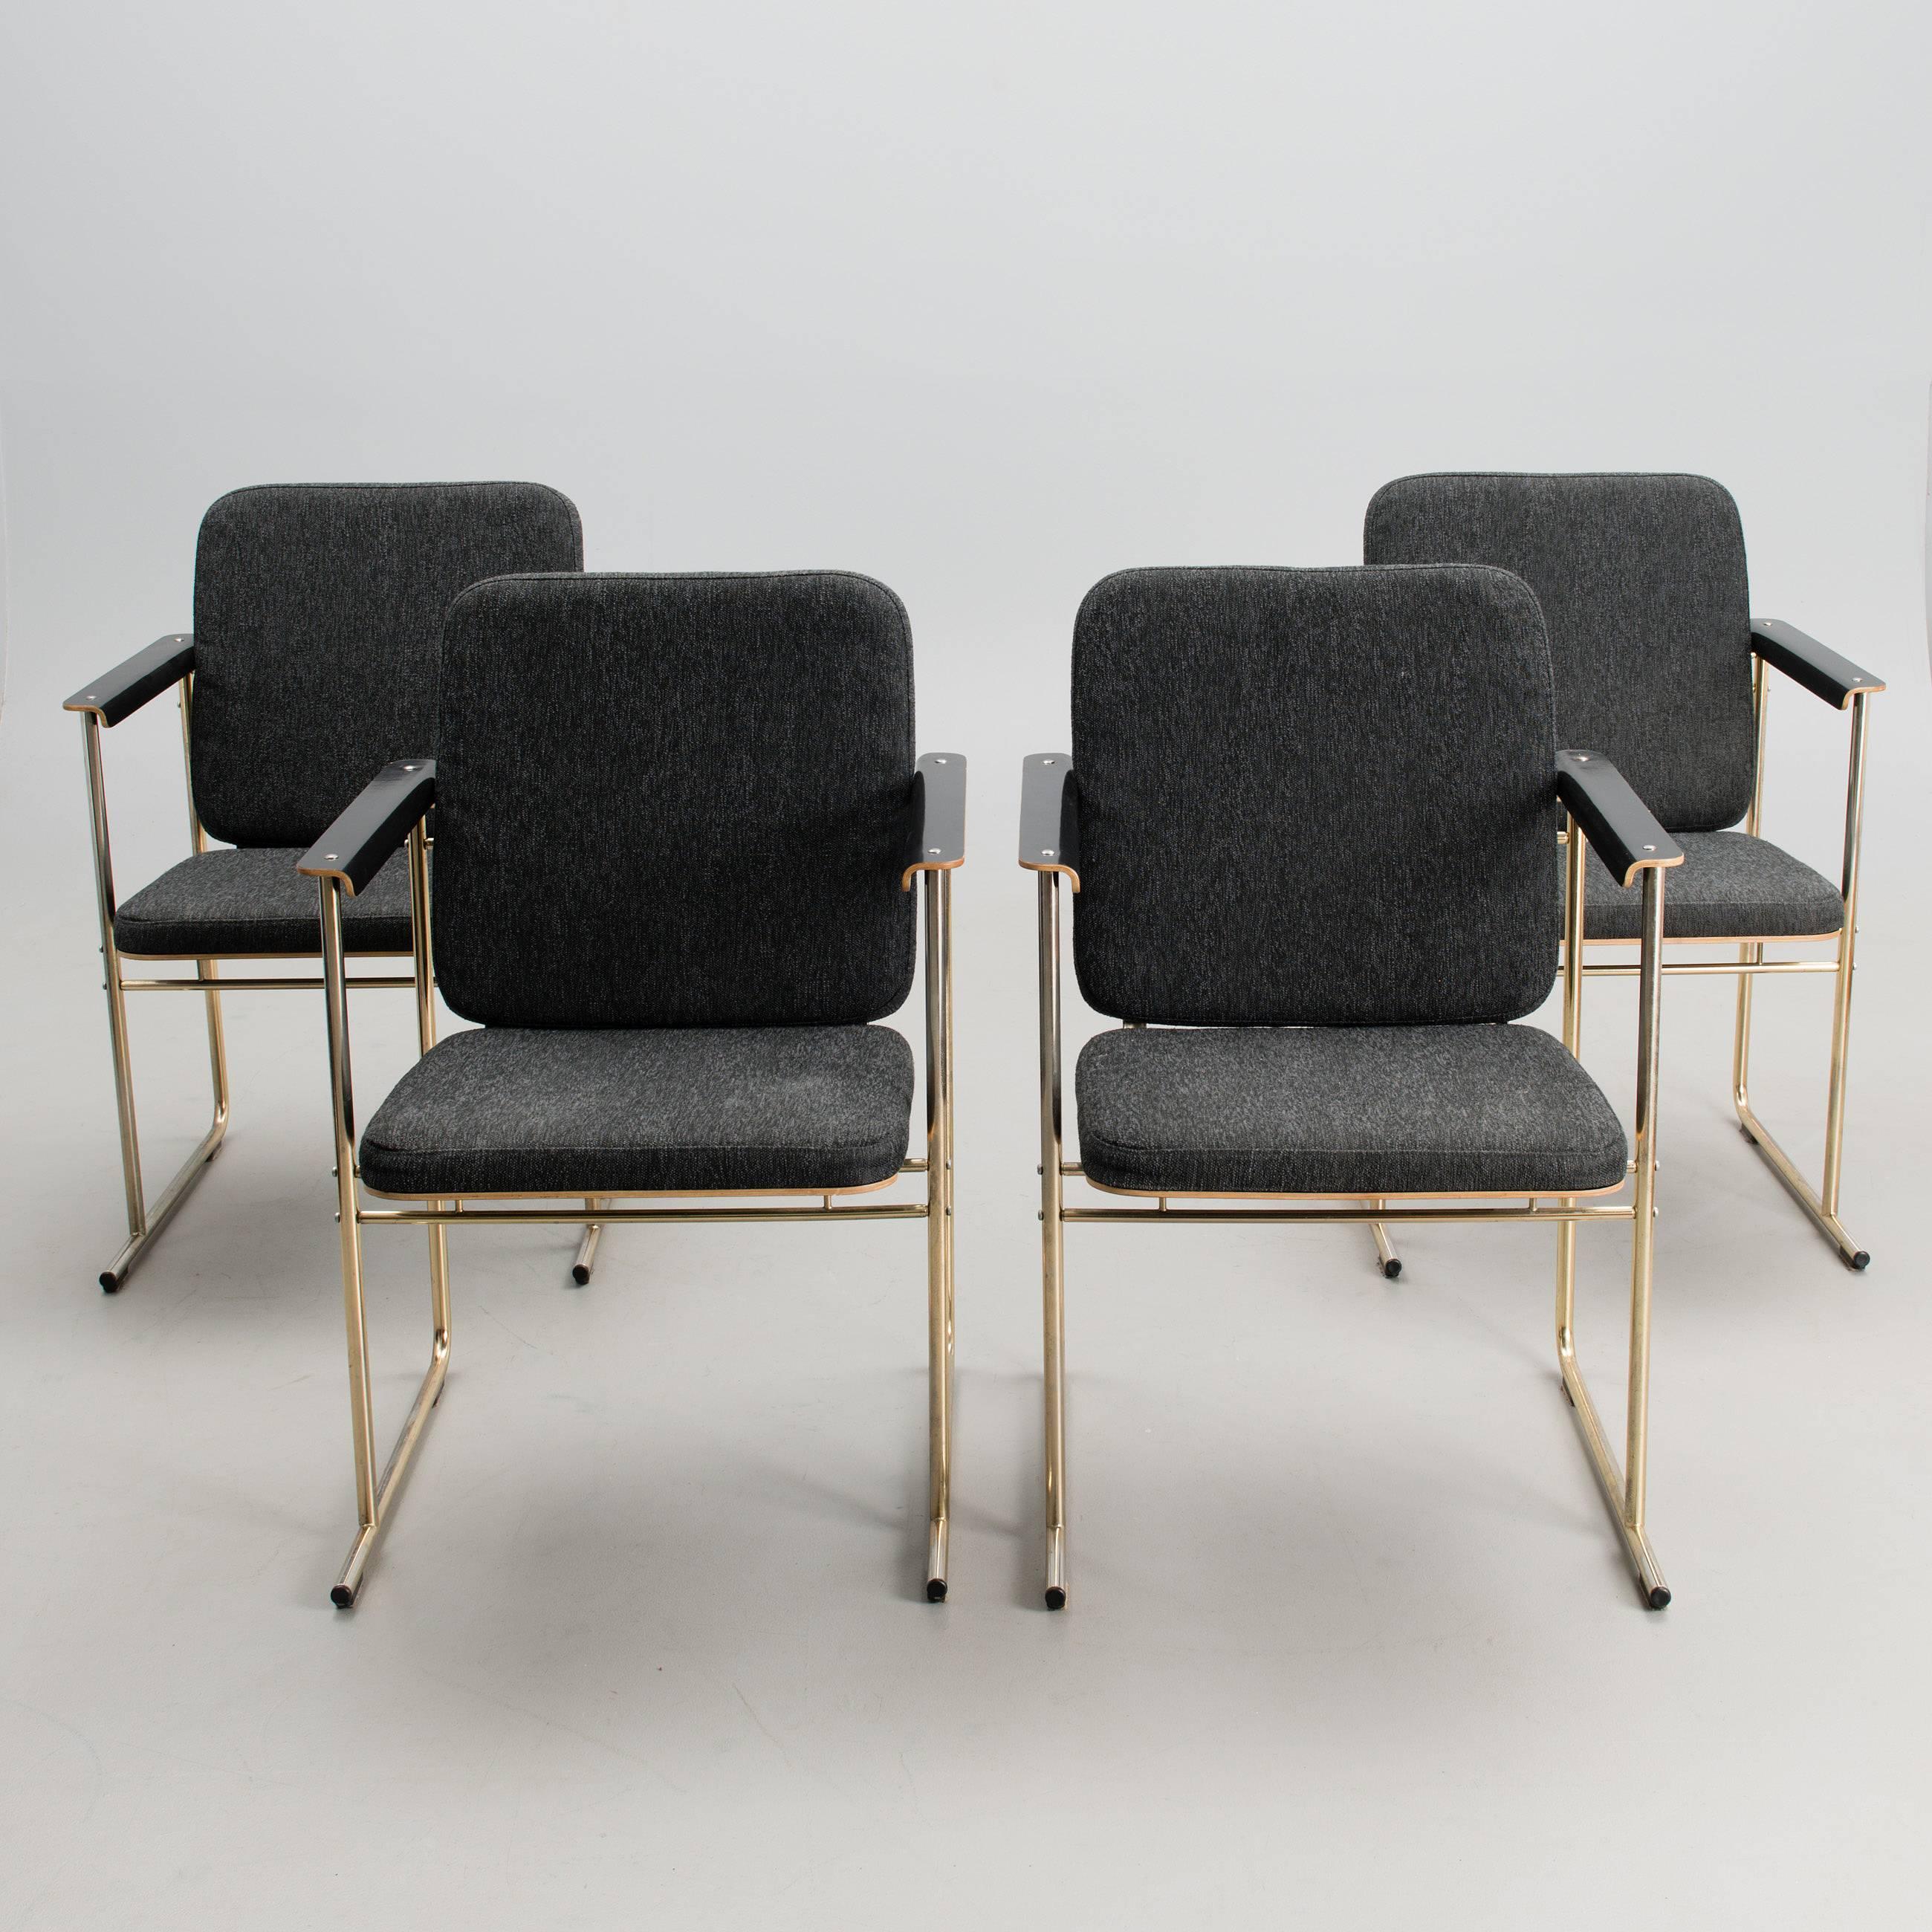 Set of four open armchairs model 'Skaala' designed by Finnish architect Yrjö Kukkapuro for Avarte Finland. Labelled by the manufacturer.

Seat, backrest and armrests of formed birch plywood, edges natural, faced in black laminate. Base of tubular